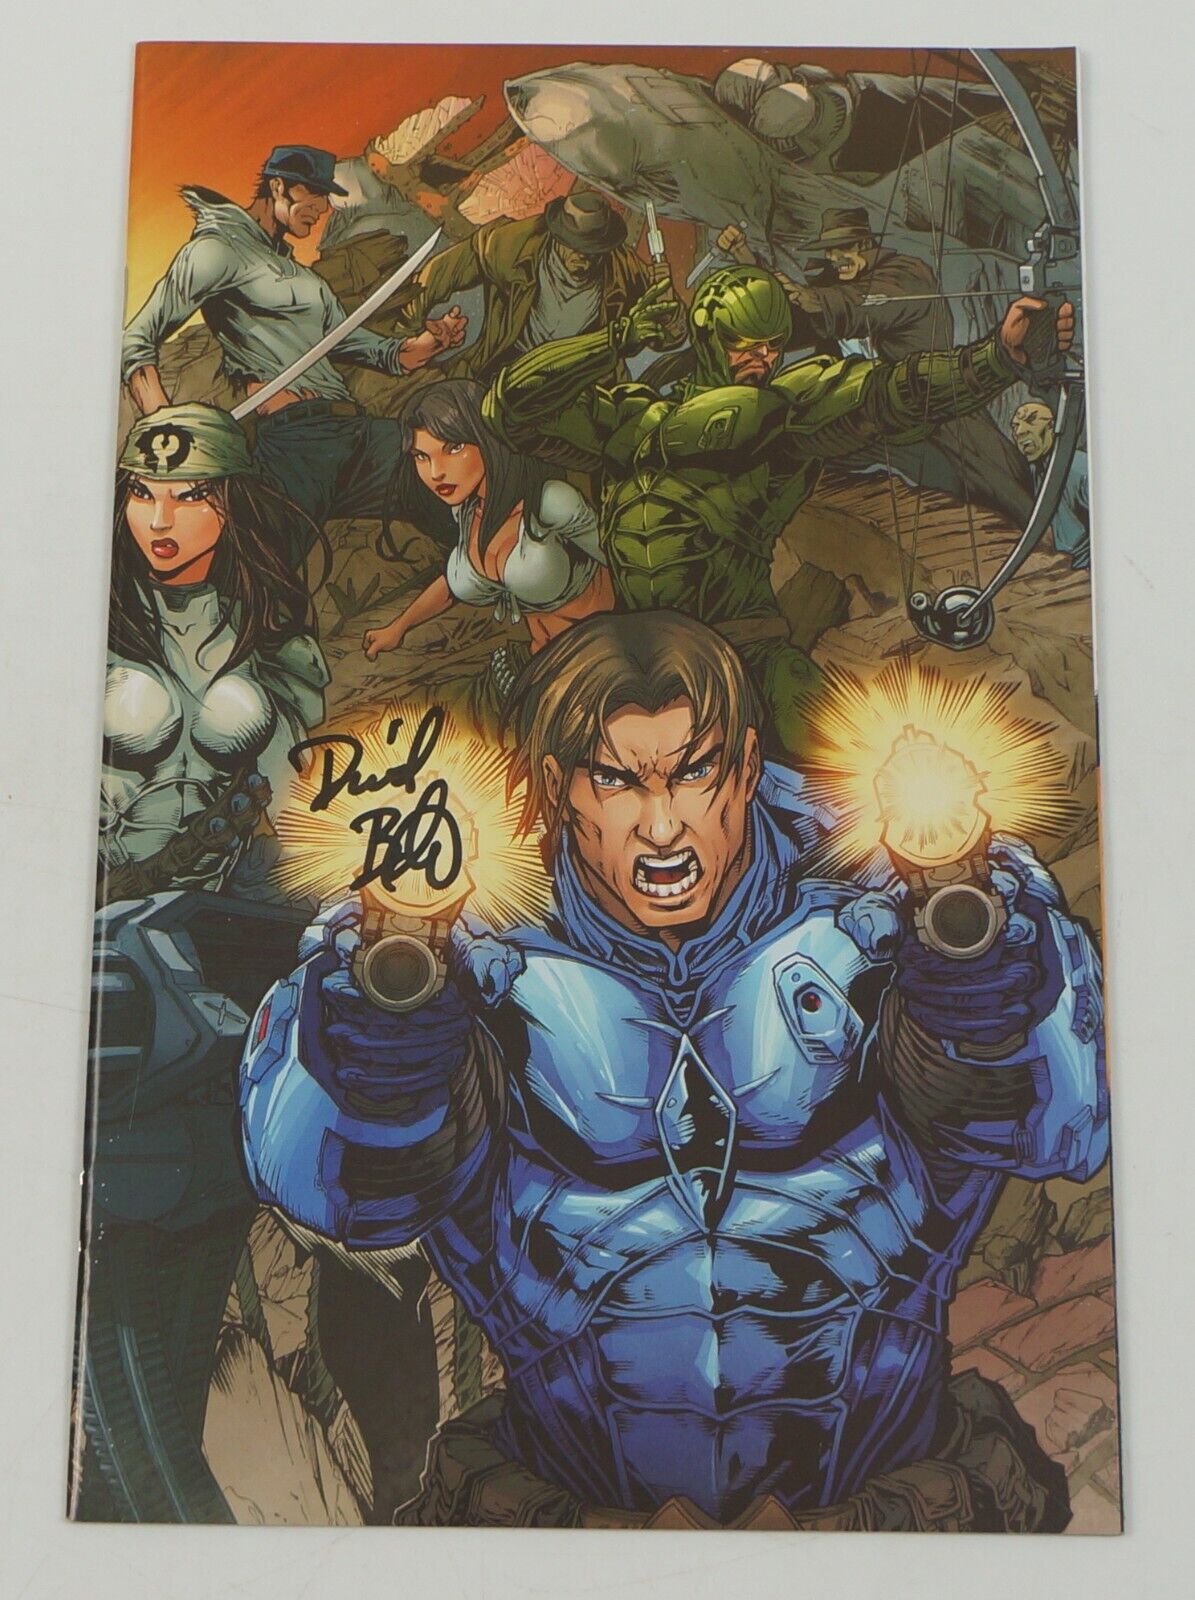 Marksmen #2 VF/NM San Diego Comic-Con Exclusive Cover signed by David Baxter